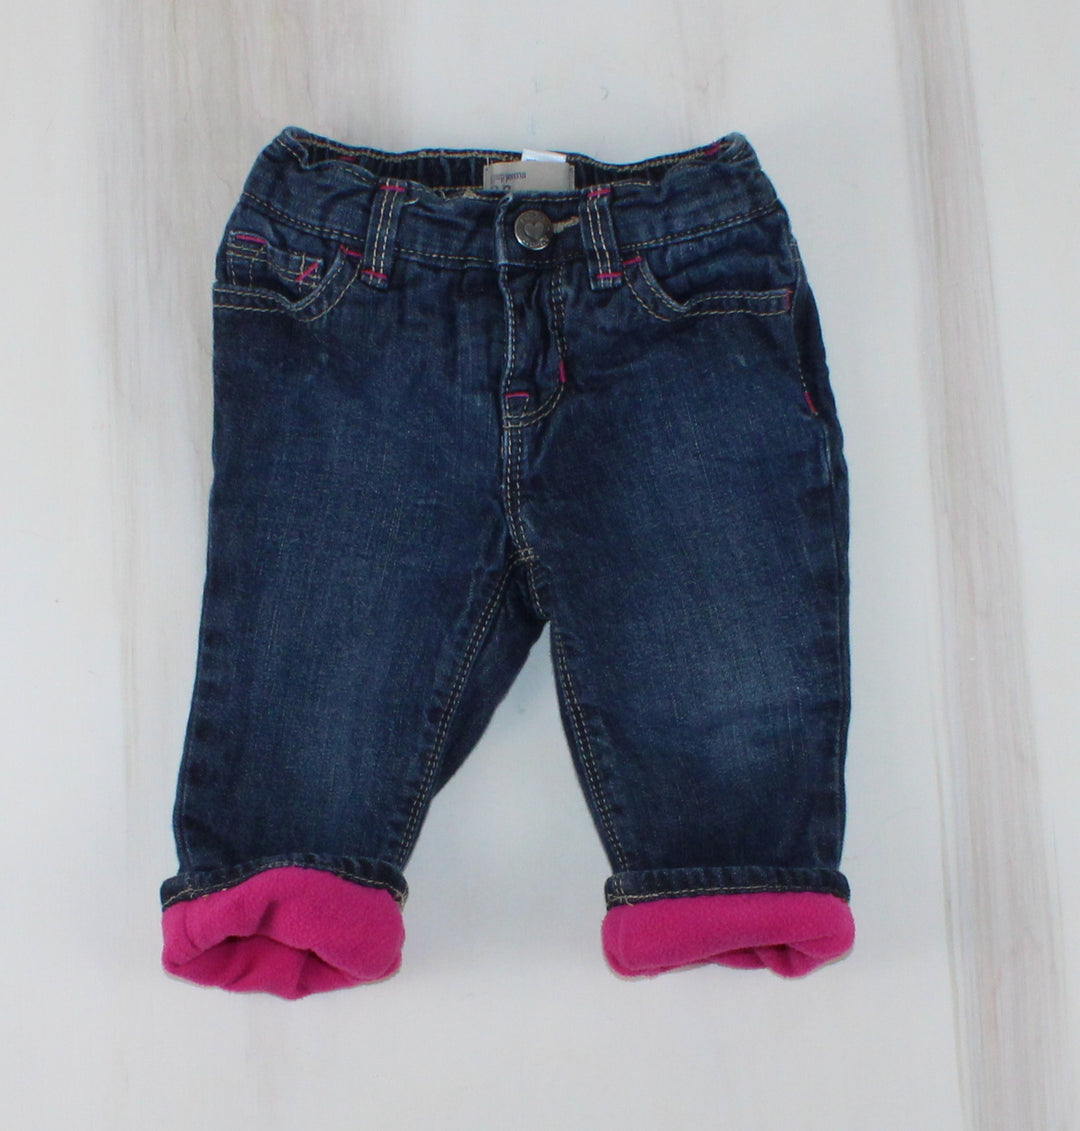 GAP JEANS WITH PINK FLEECE LINING 3-6M EUC